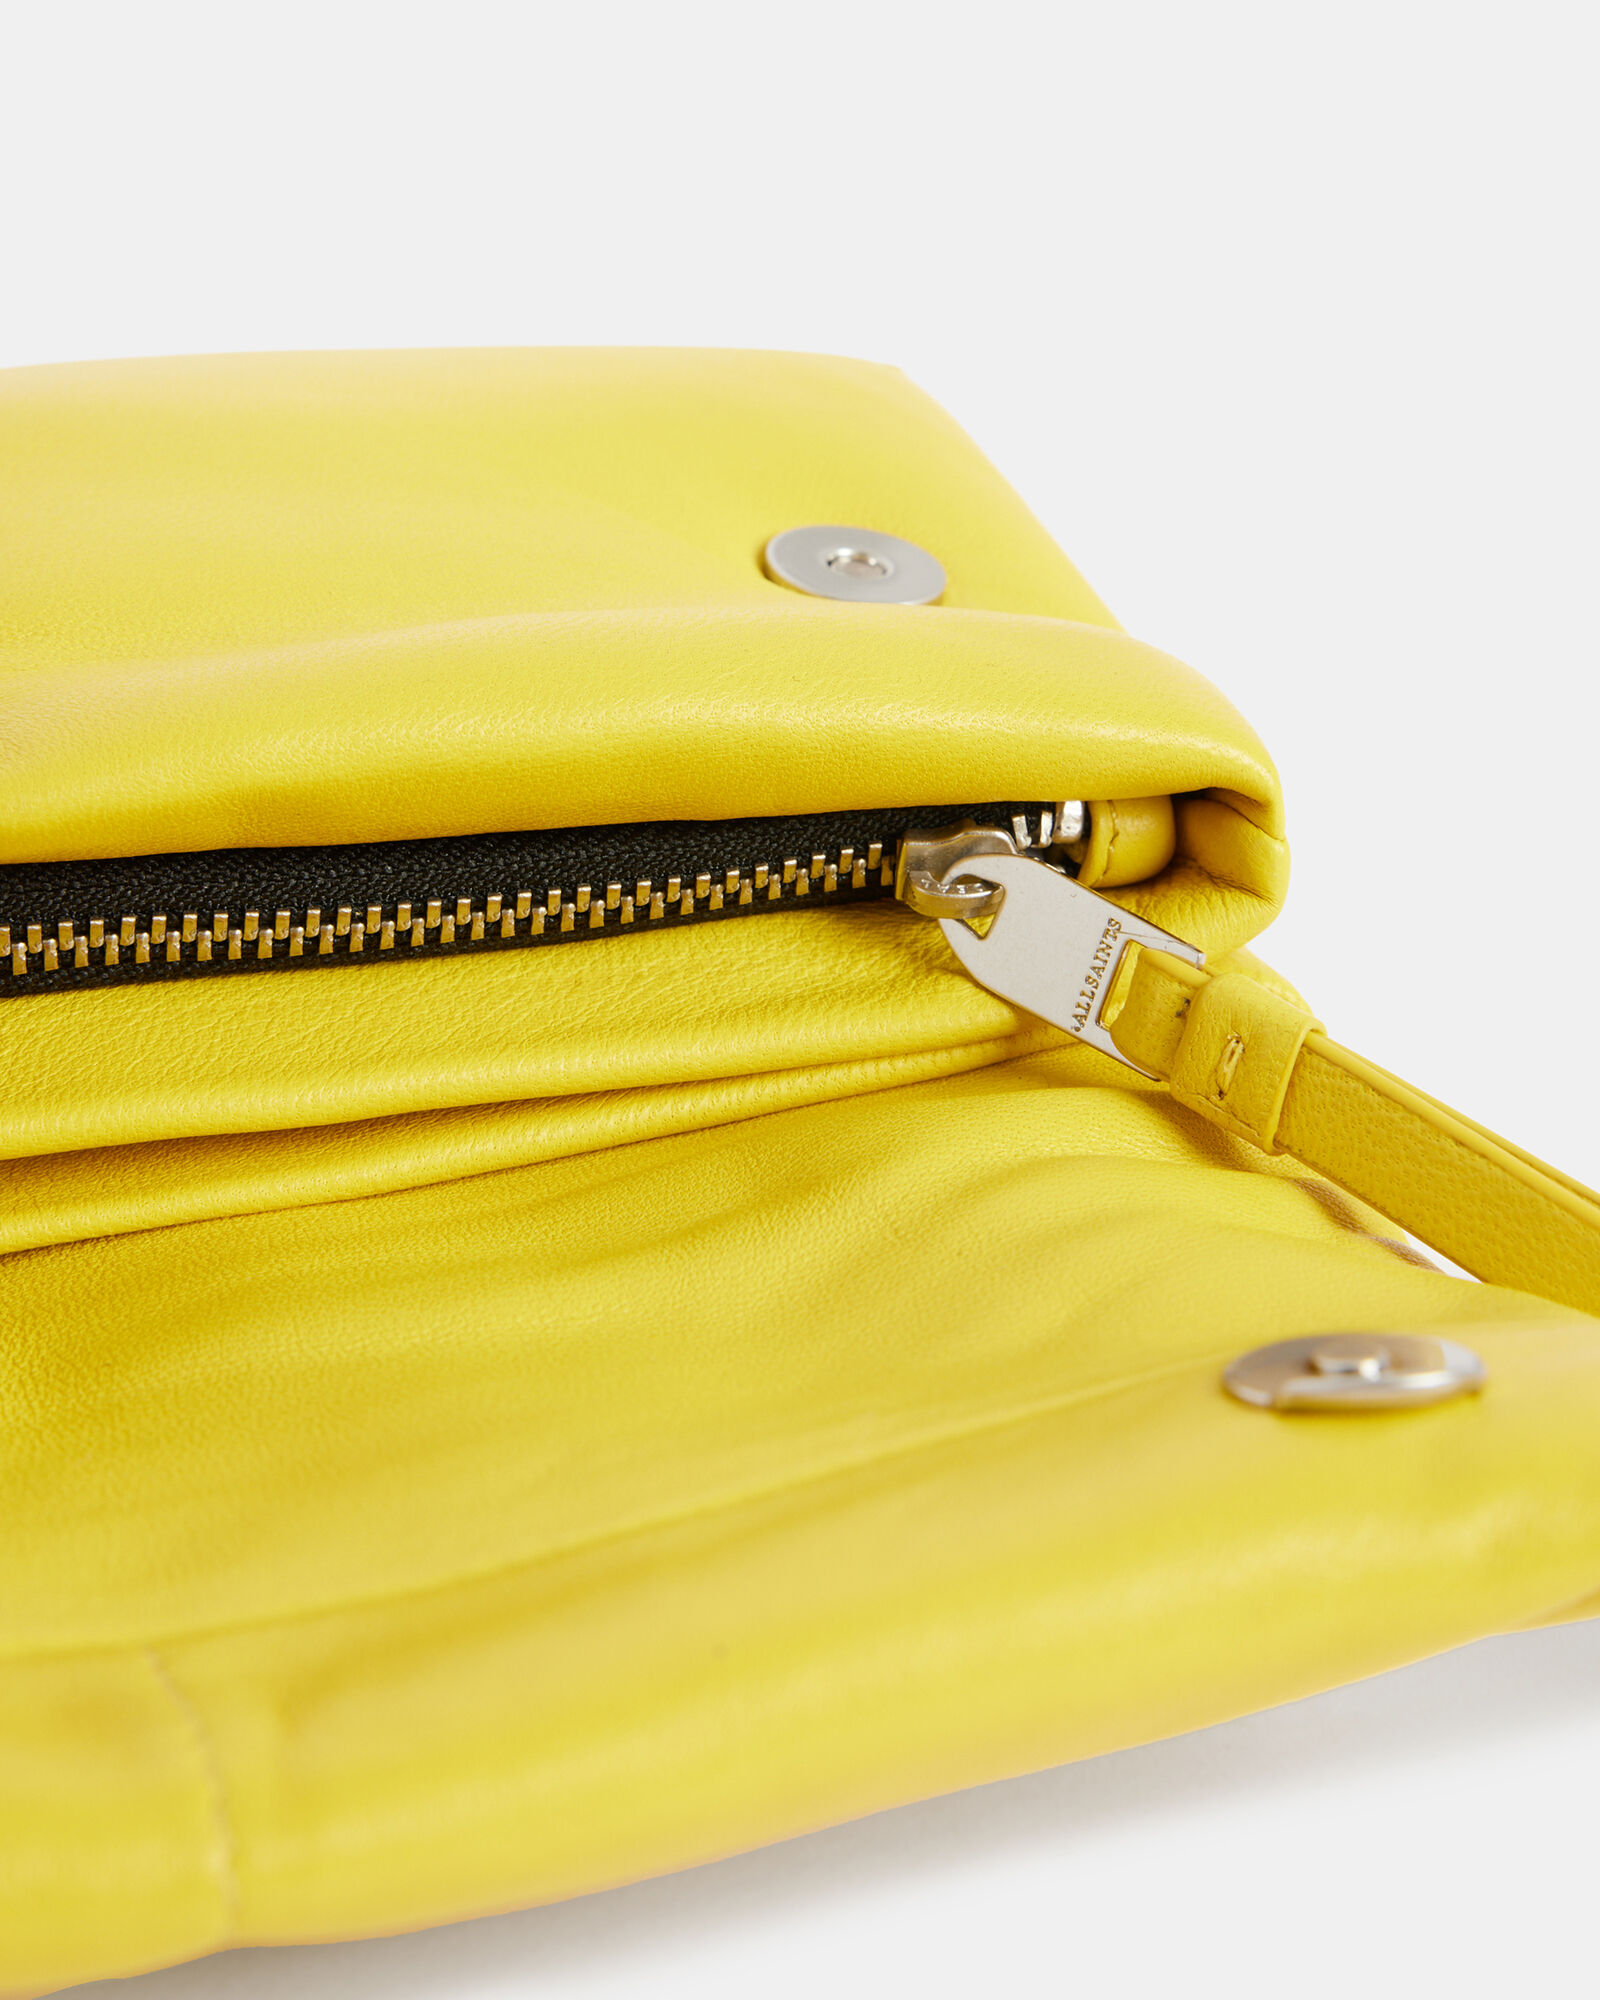 Ezra Leather Quilted Crossbody Bag Yellow | ALLSAINTS